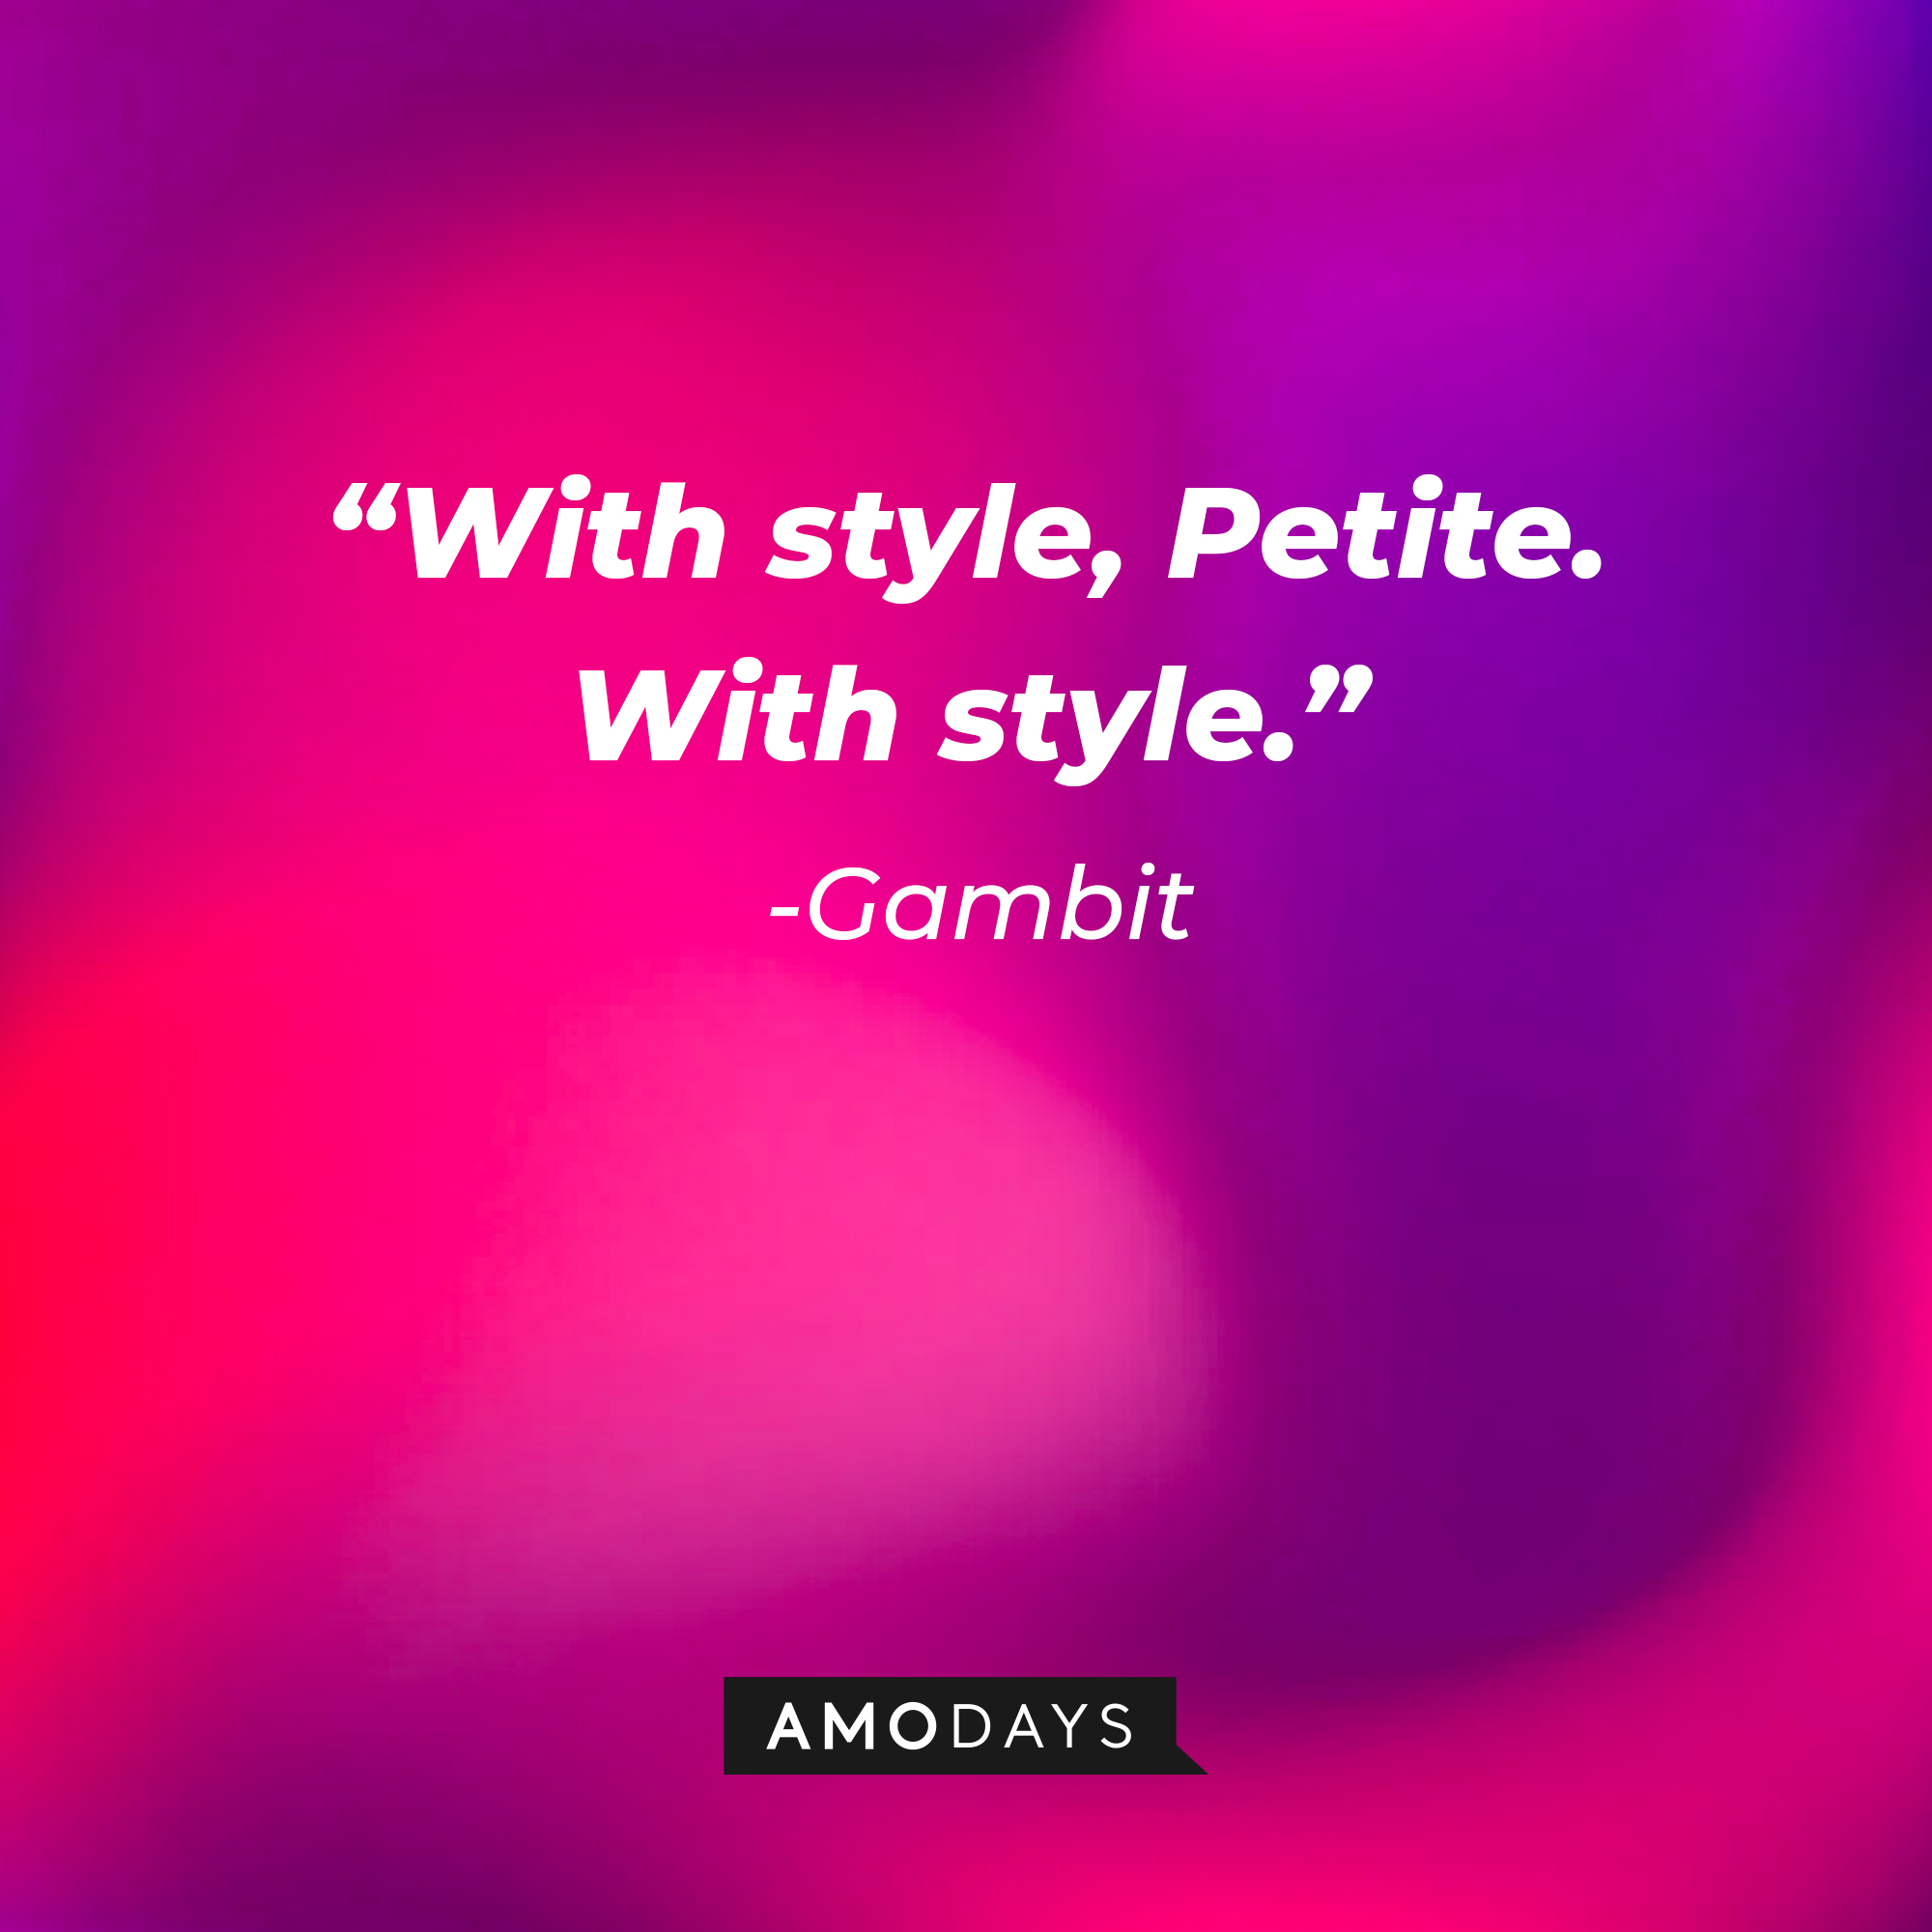 Gambit’s quote: “With style, petite. With style.”  | Source: AmoDays